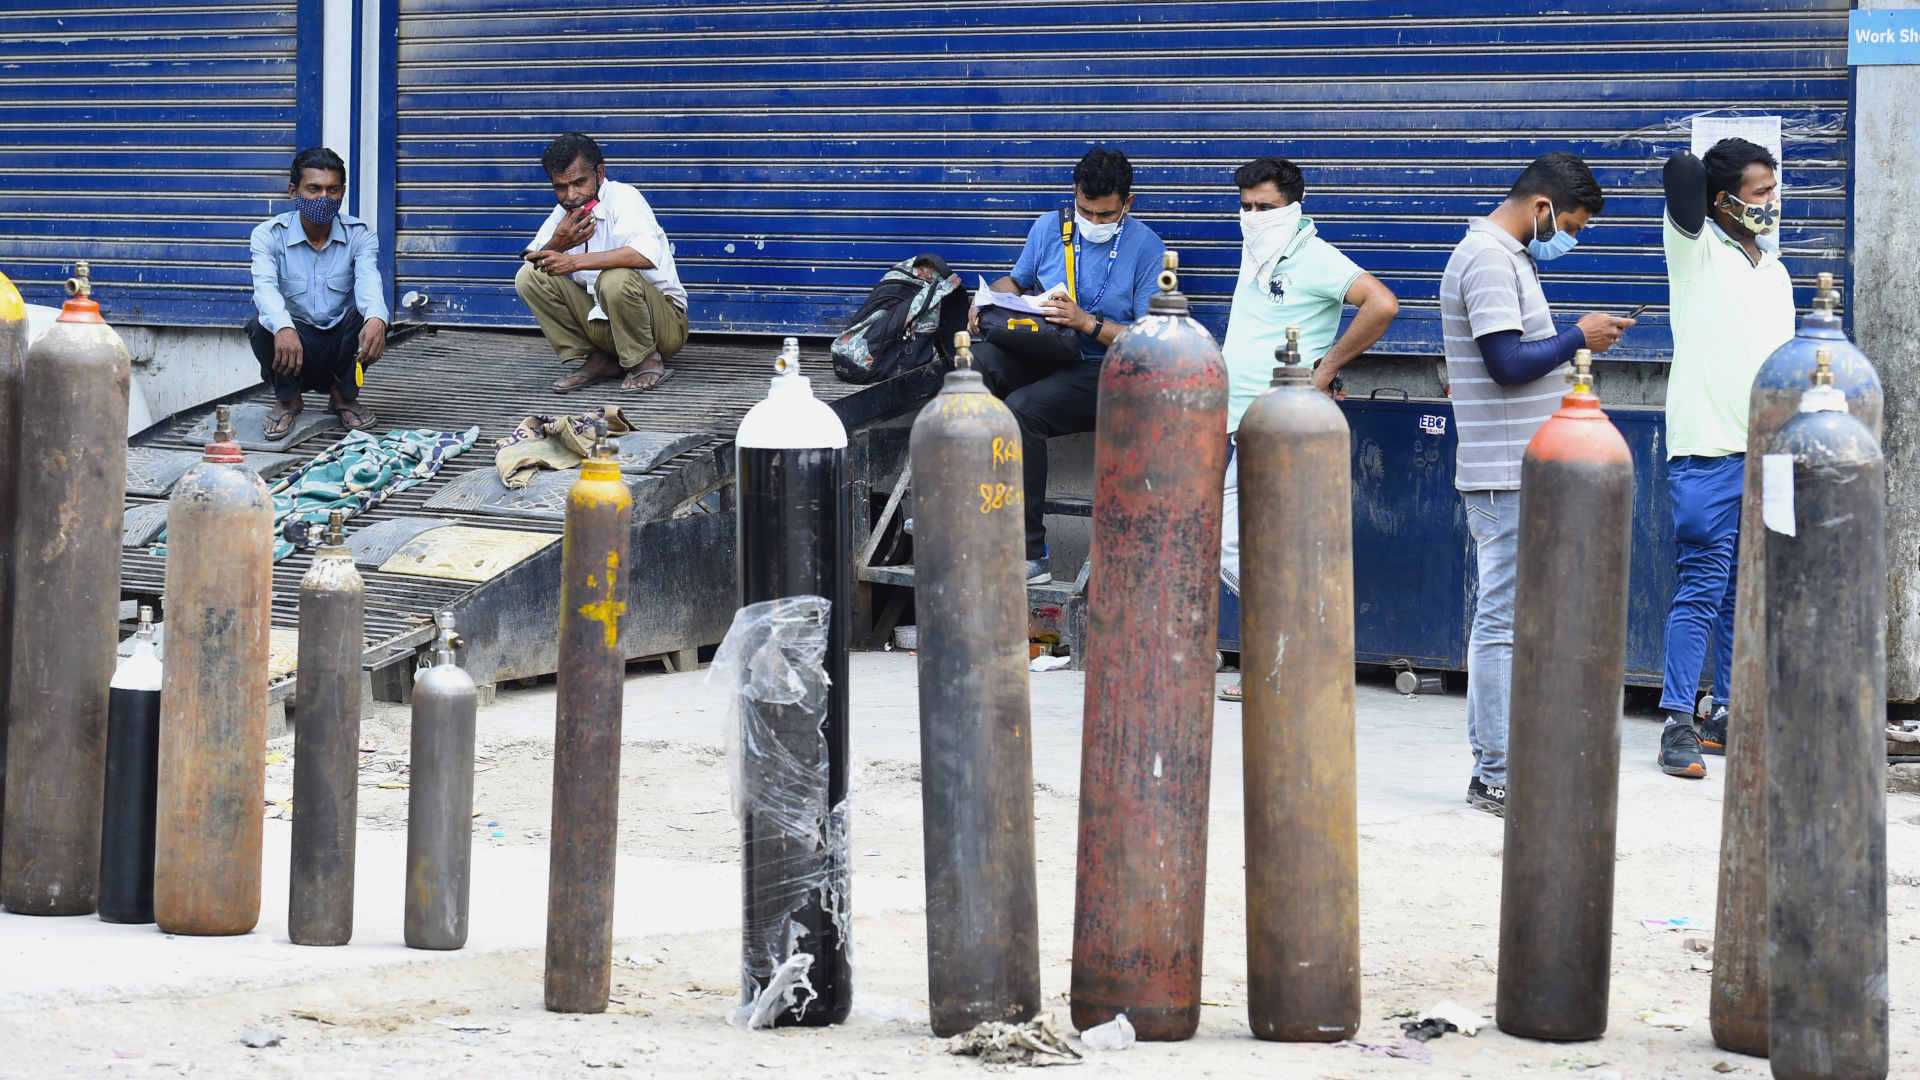 People waiting for oxygen cylinders in the Mayapuri Industrial area of New Delhi, India on May 8, 2021.